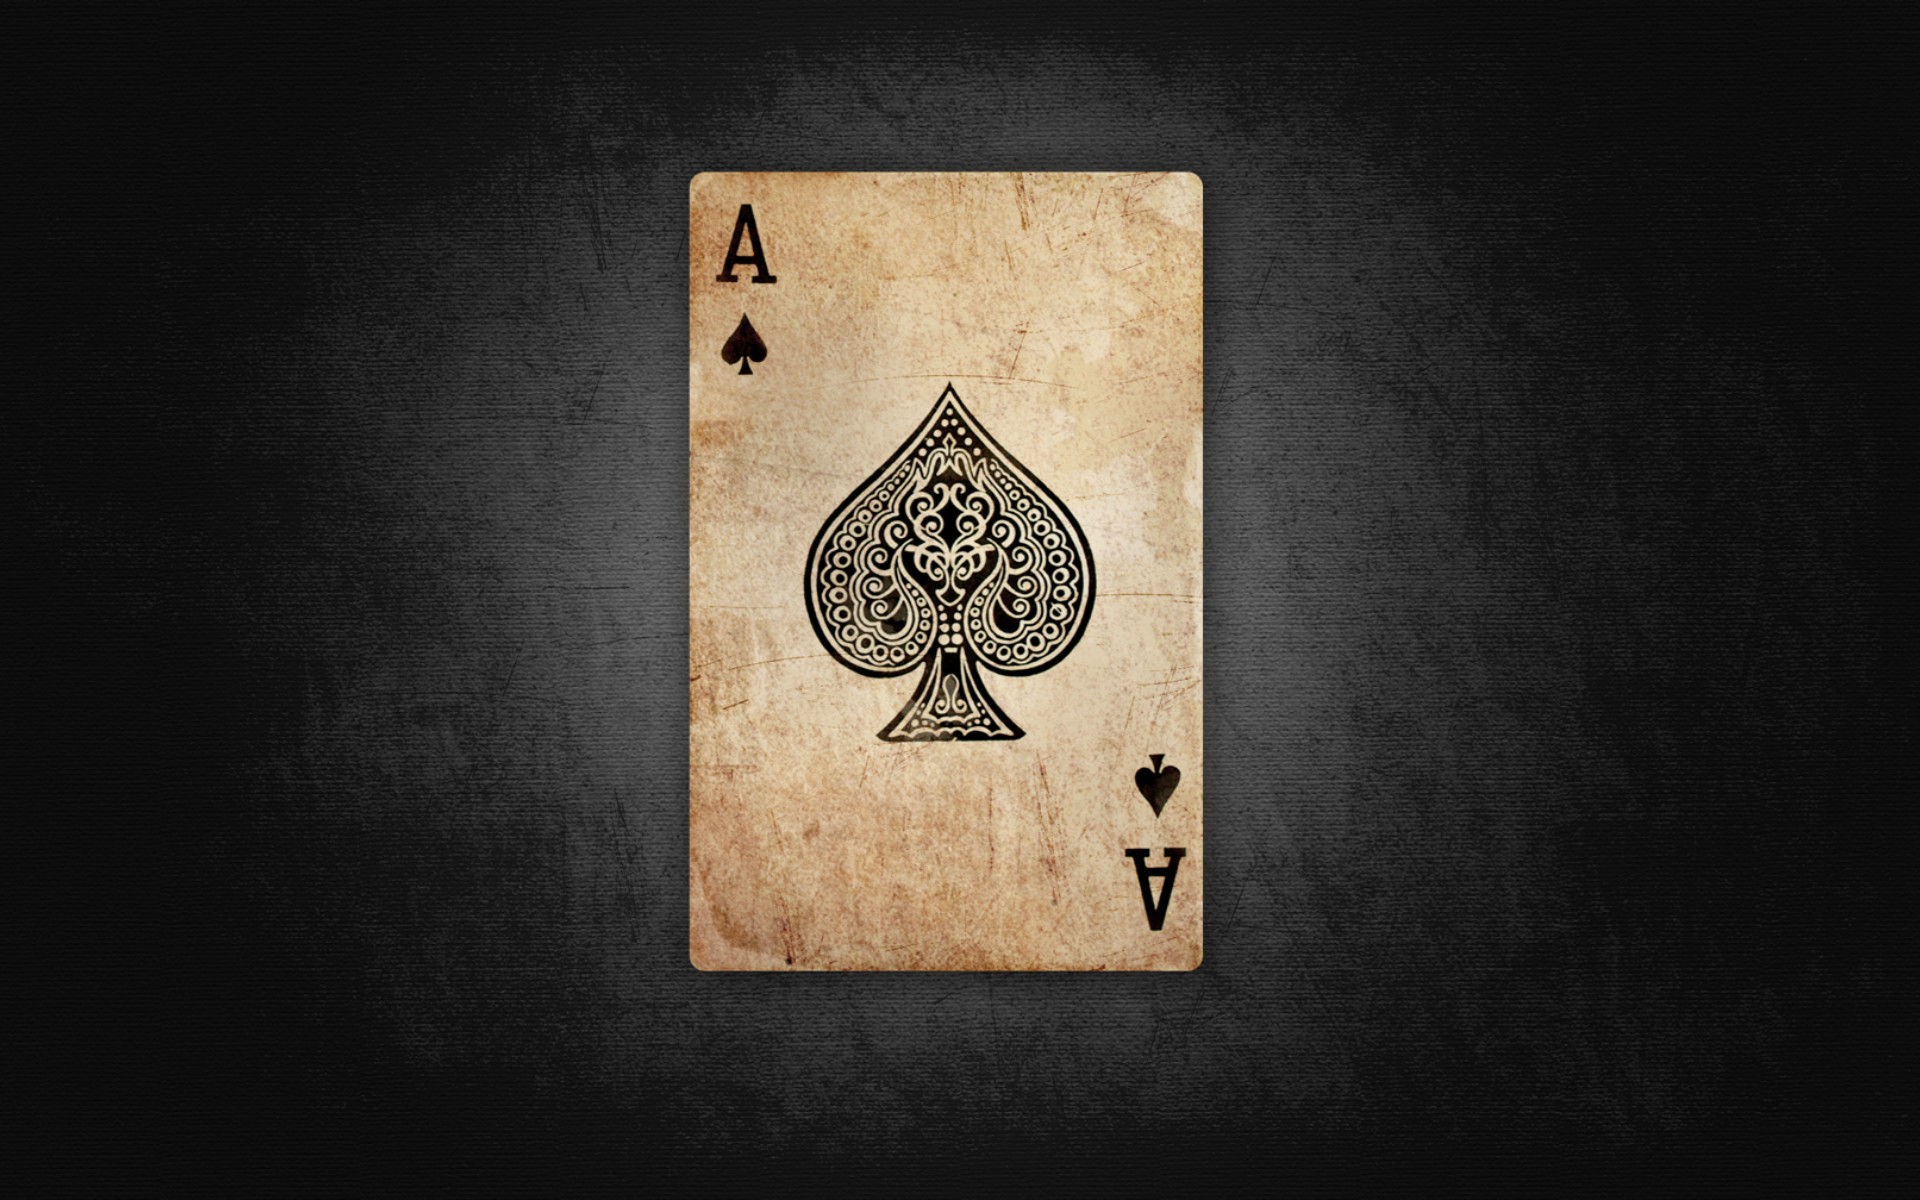 65 Card HD Wallpapers Backgrounds - Wallpaper Abyss